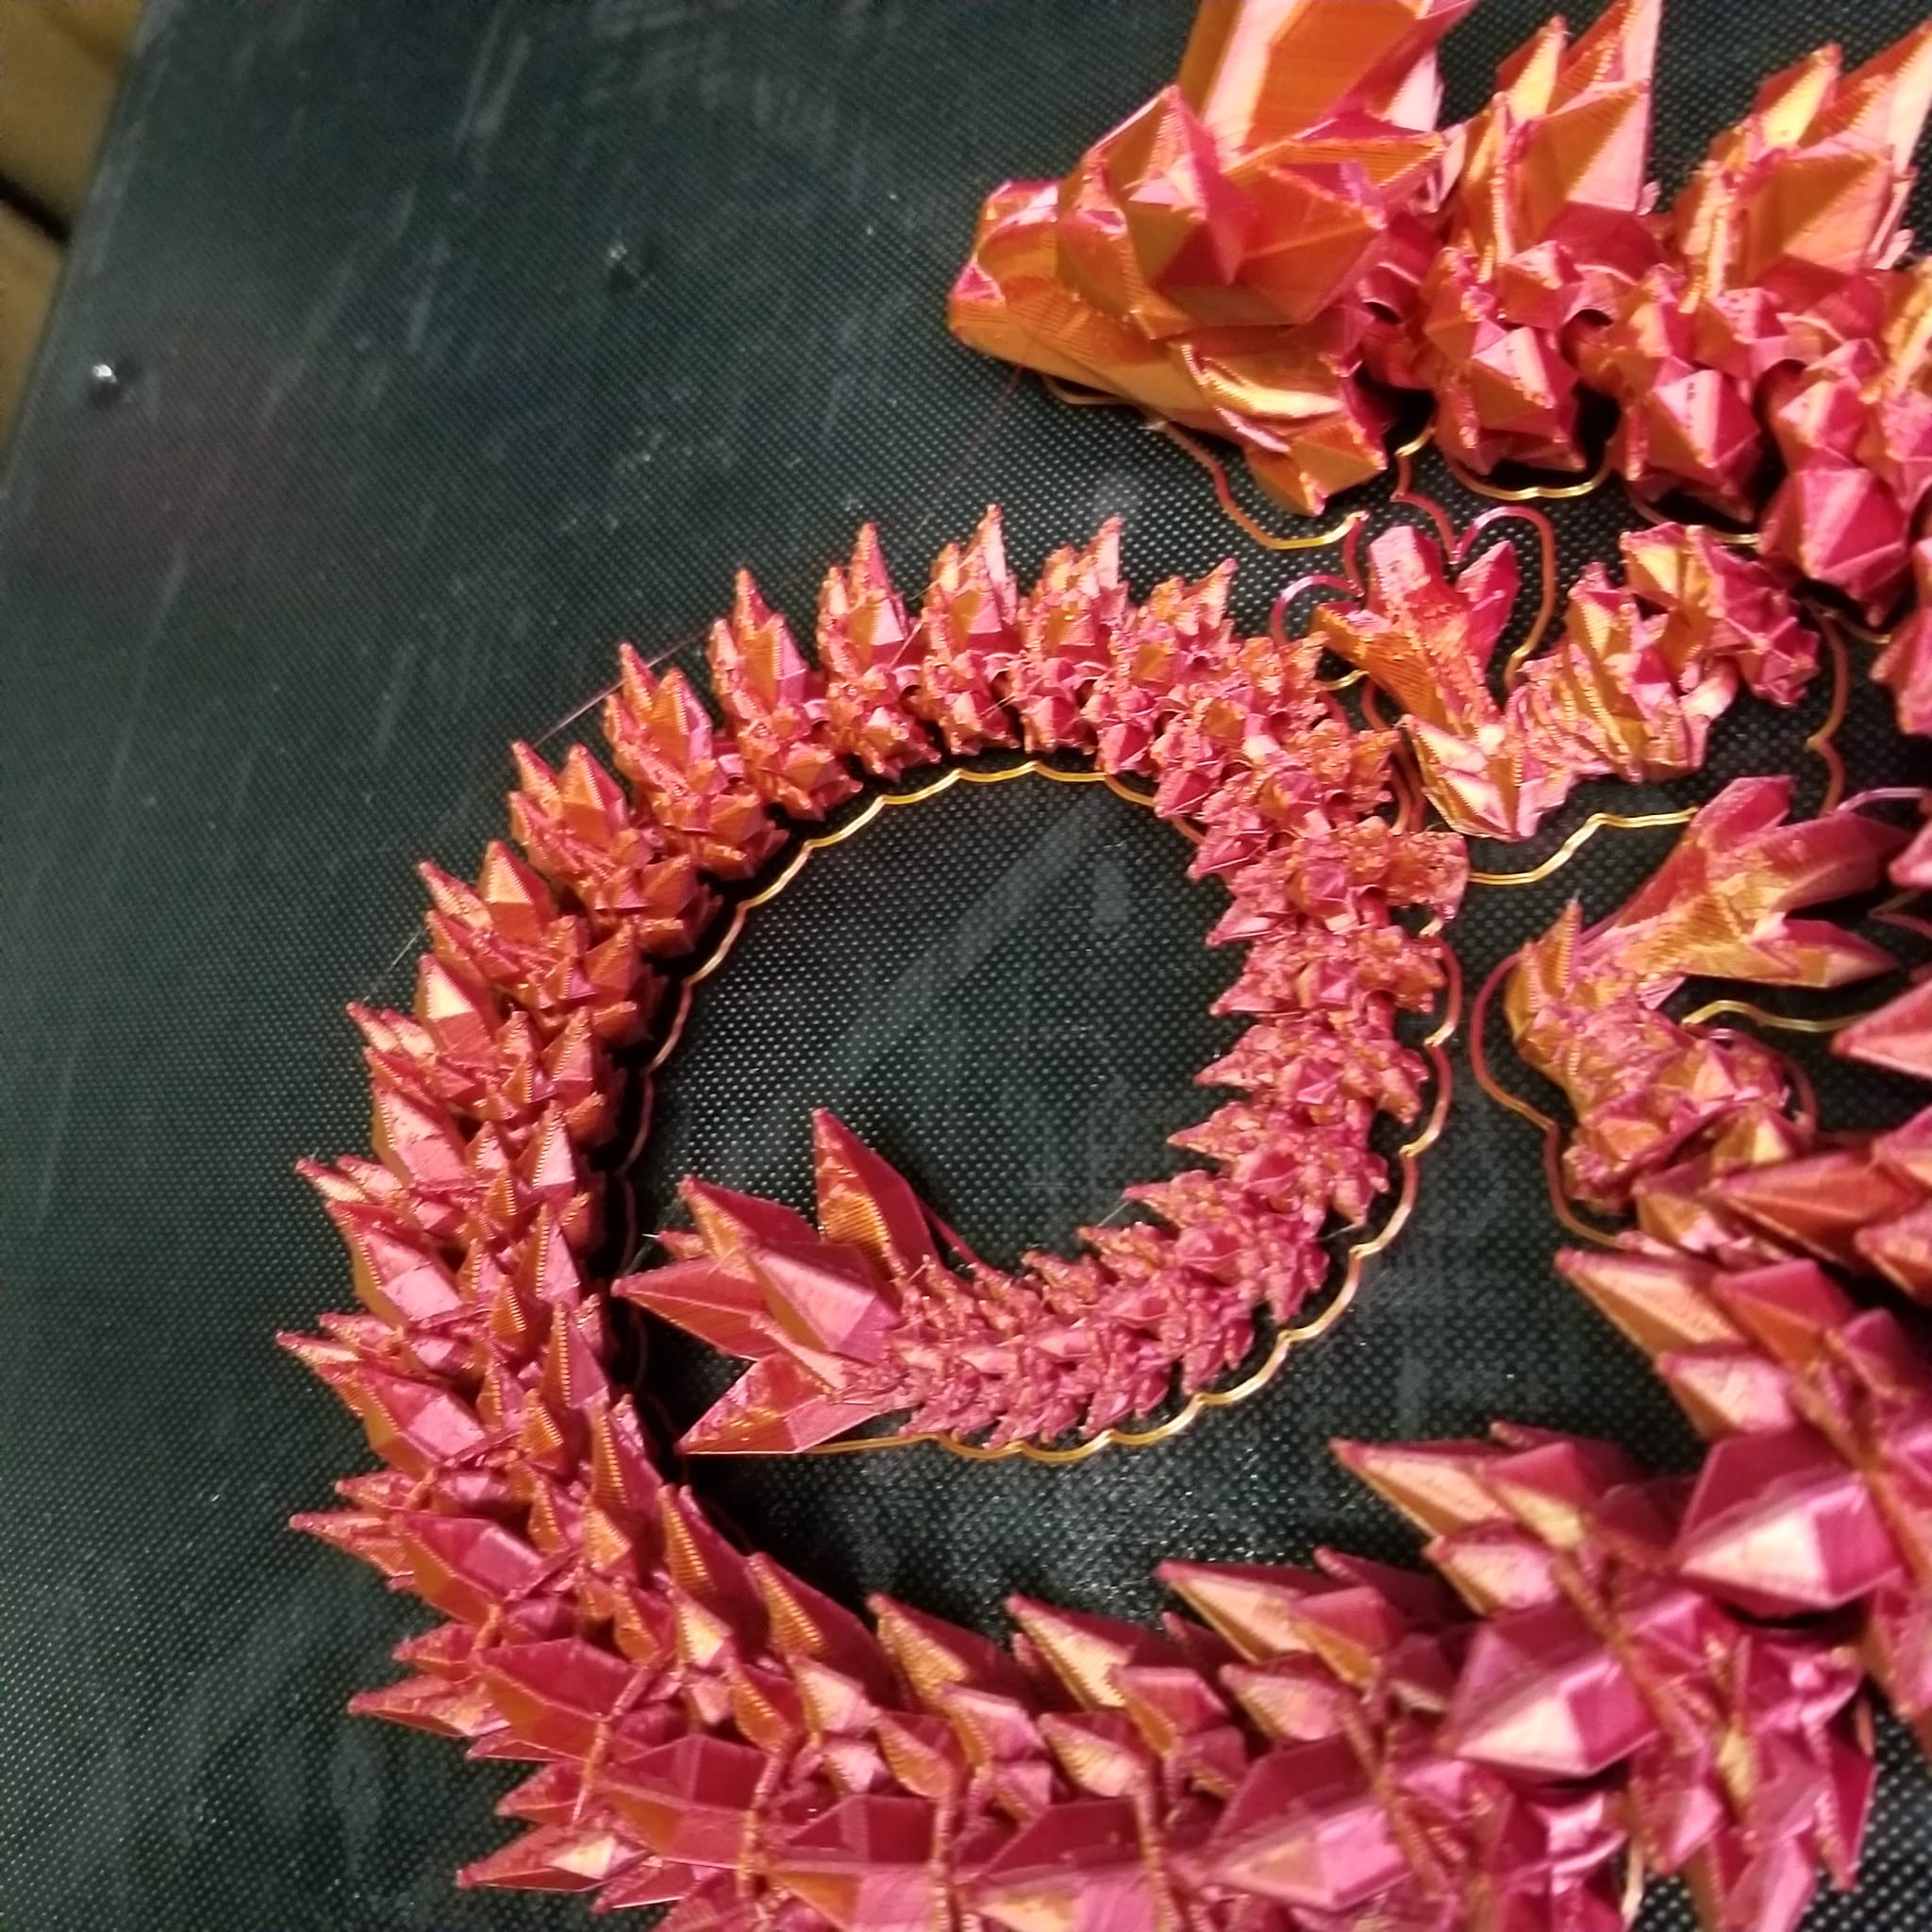 red crystal dragon